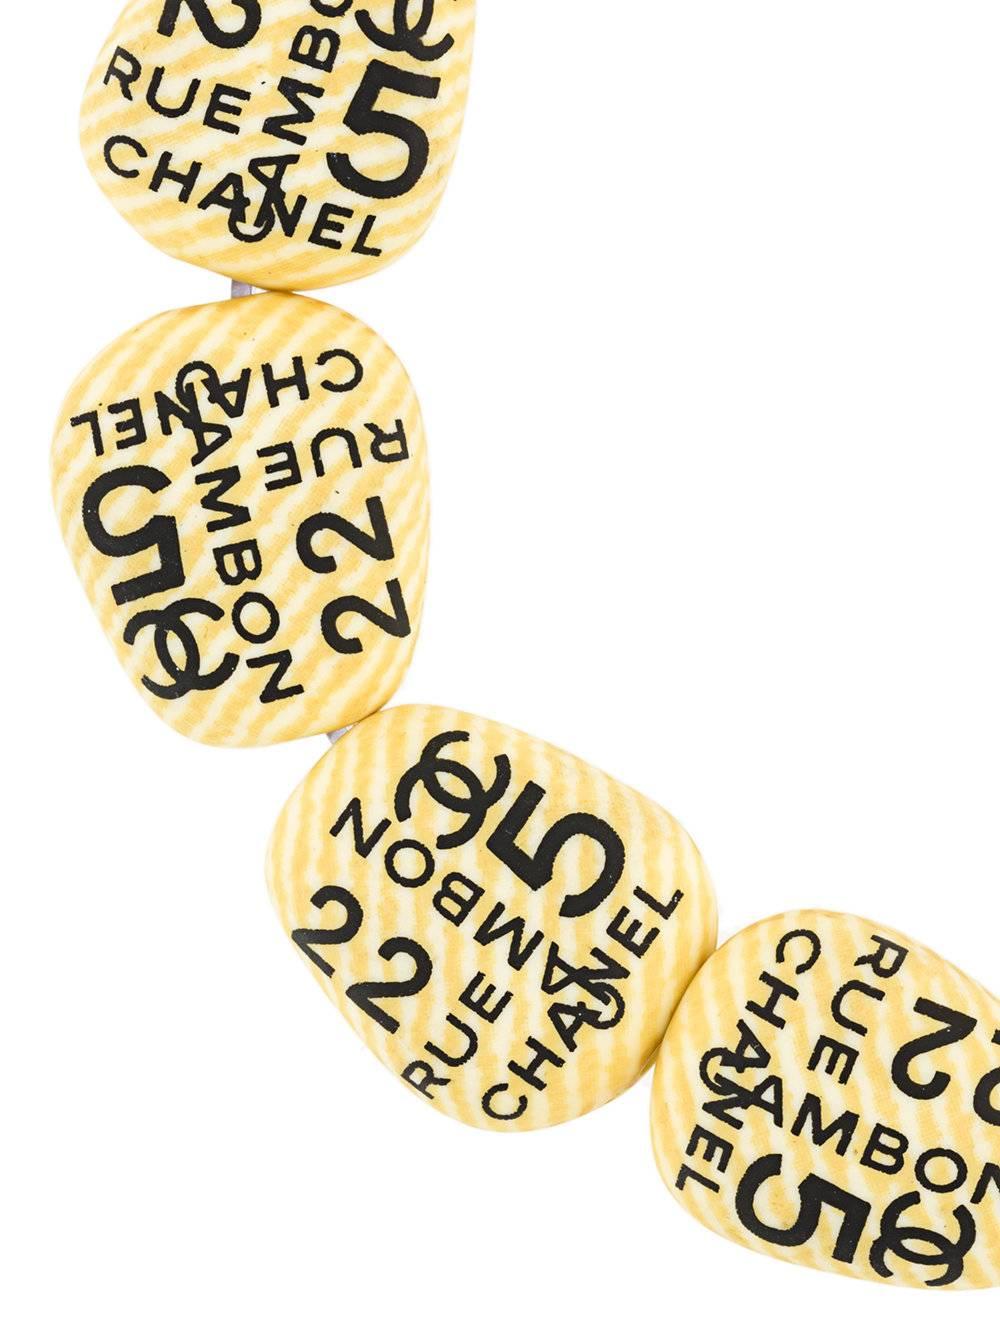 Rare Chanel set of Luck Clover n°5, Rue Cambon of 2002. Made of resin. 
Marked: Chanel 02 Made in France. 
Size of earrings: 1.2 cm, bracelet adjustable size. 
Excellent condition.  